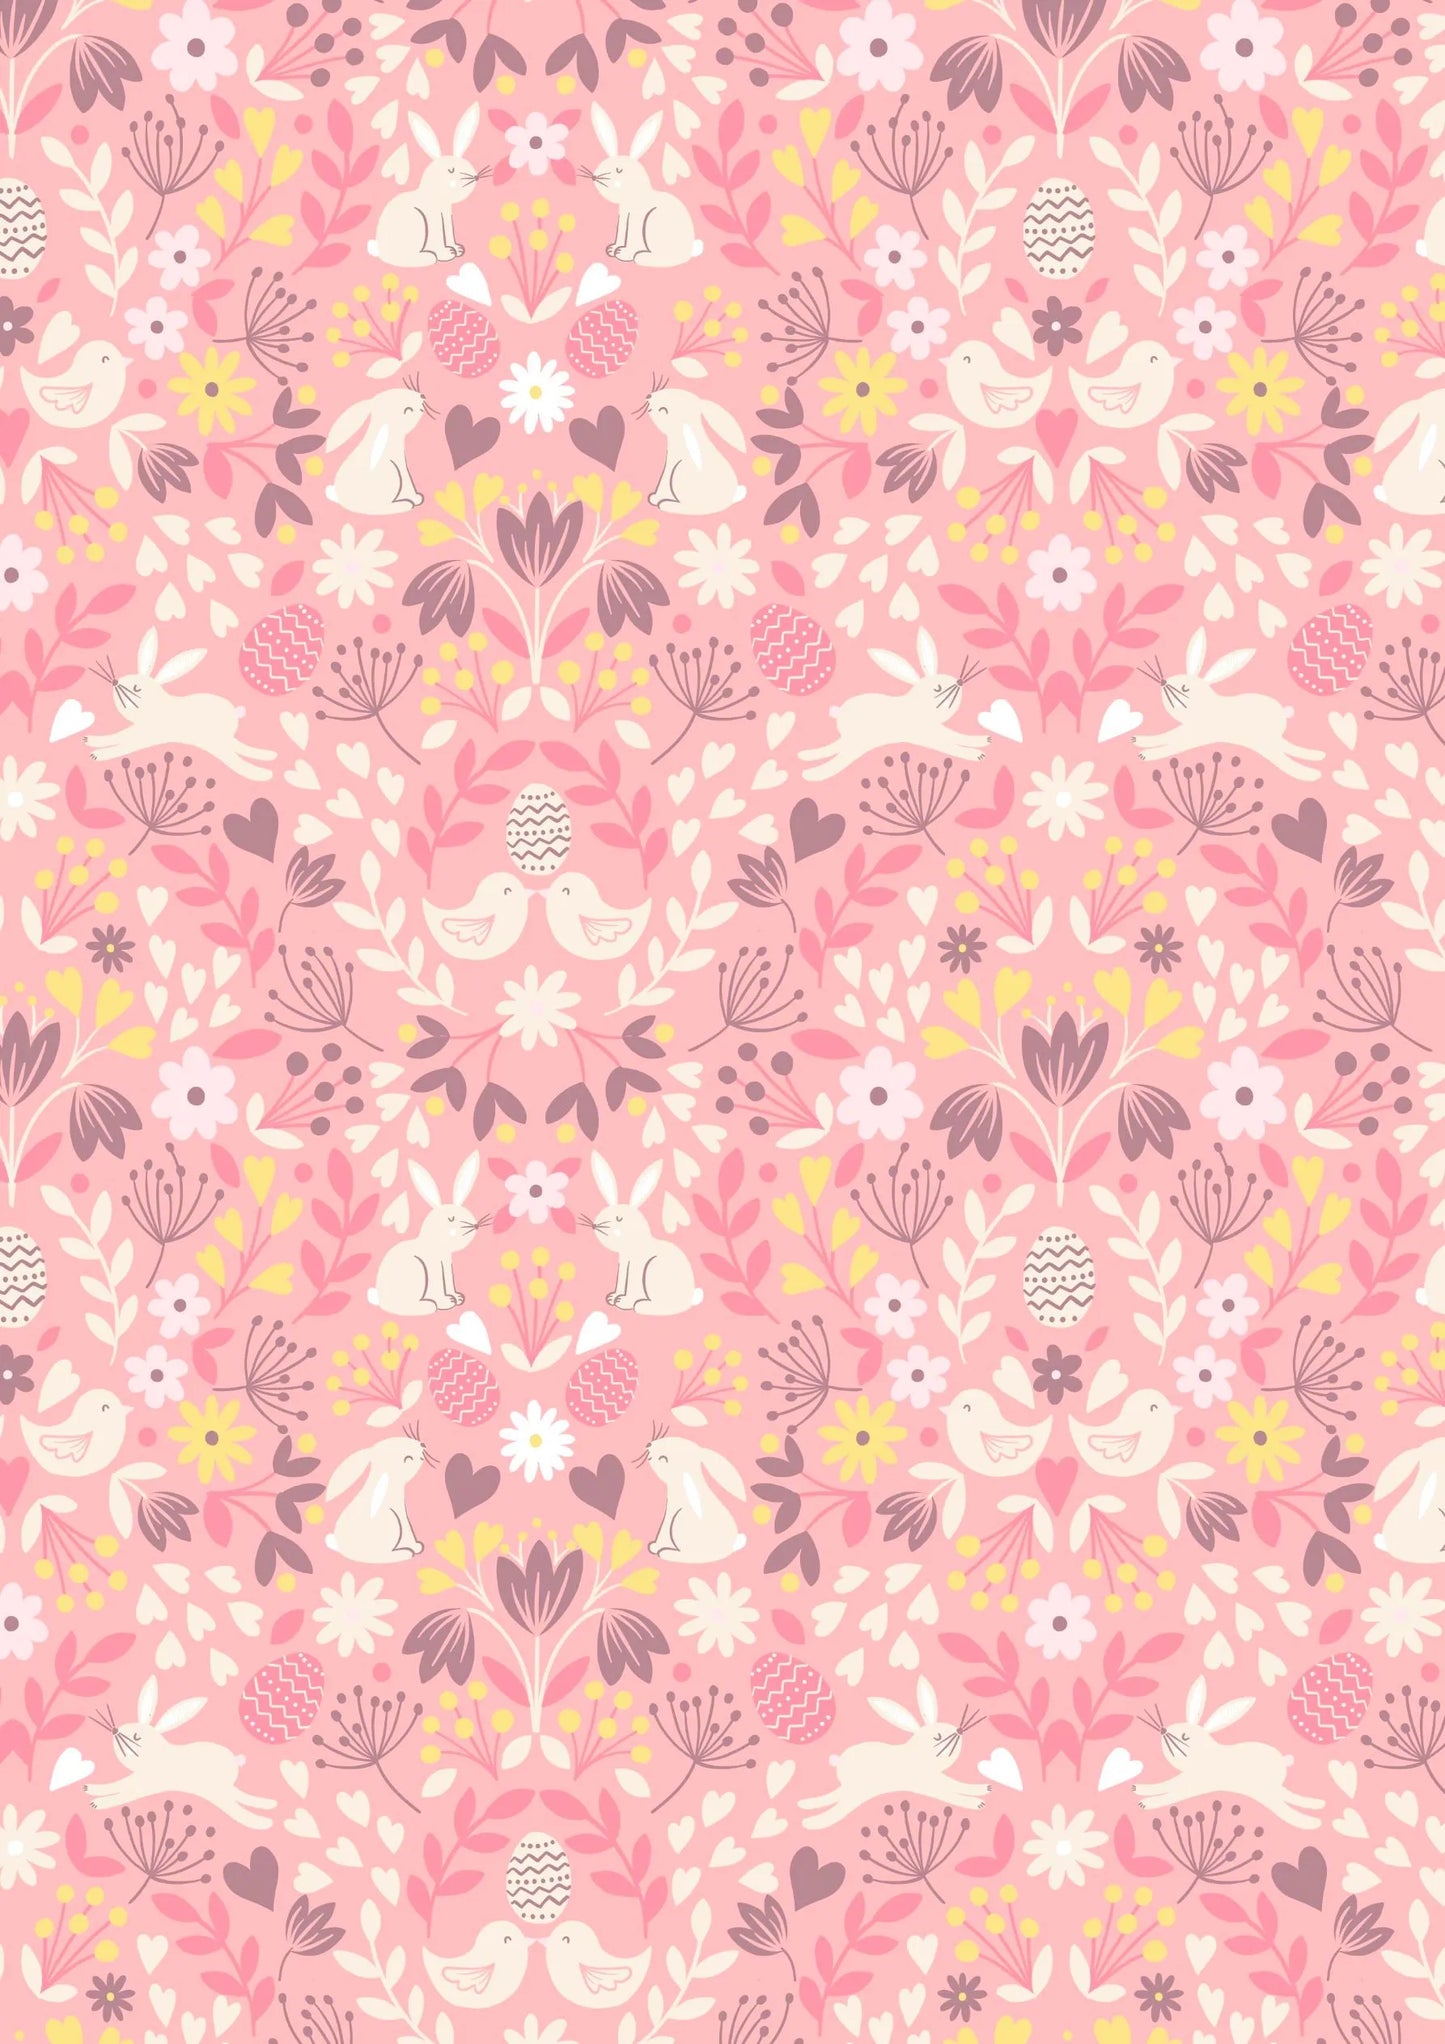 Spring Treats - Mirrored Bunny & Chicks on Rose Pink